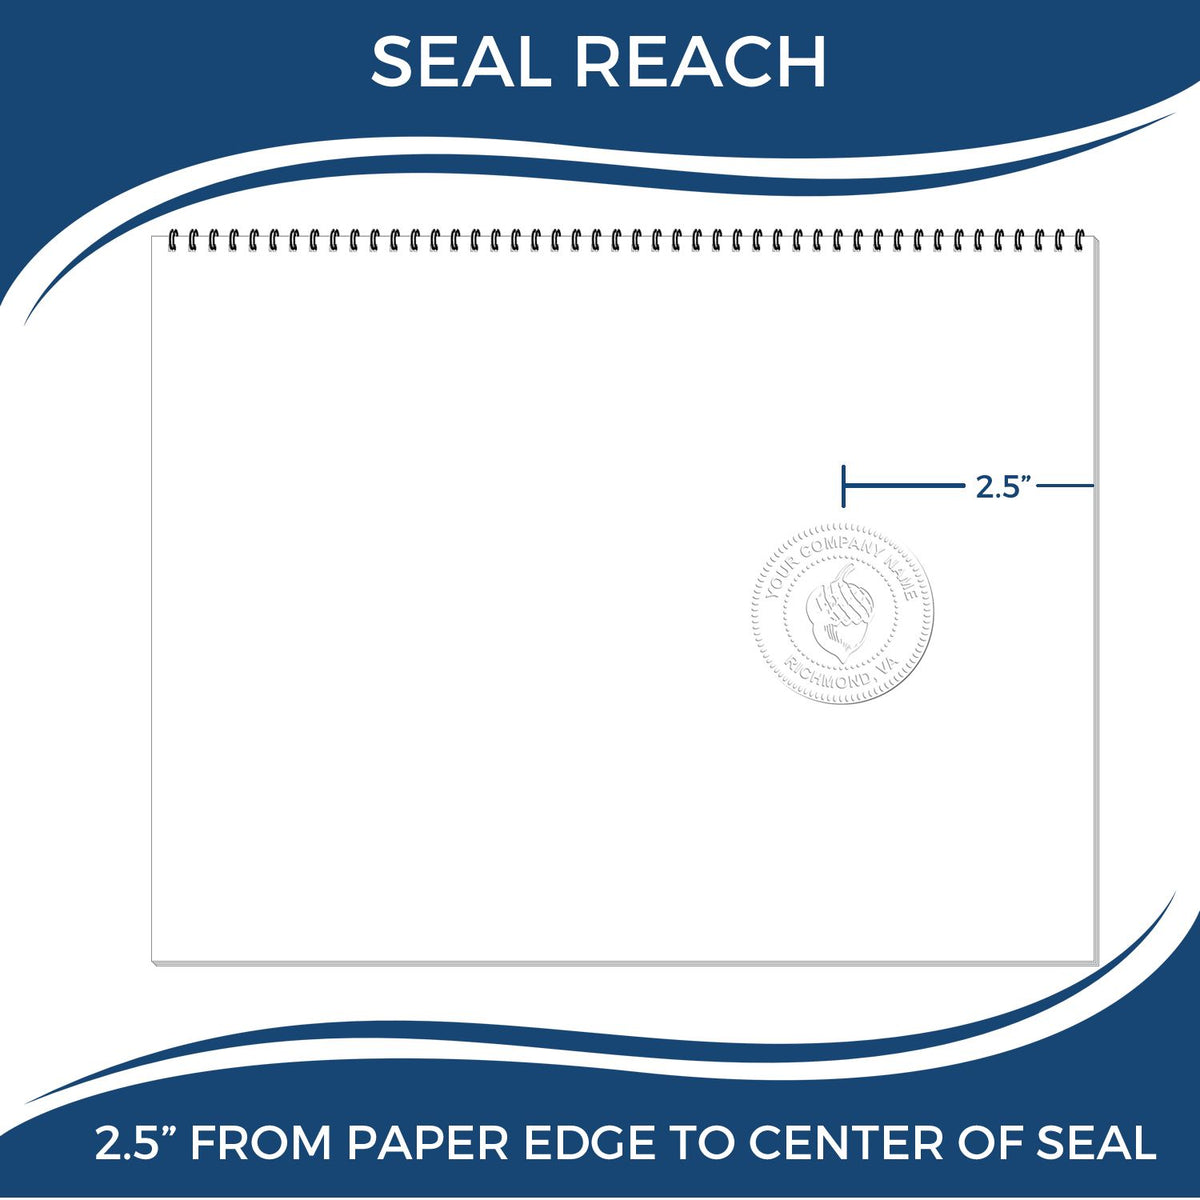 An infographic showing the seal reach which is represented by a ruler and a miniature seal image of the Long Reach Indiana Land Surveyor Seal